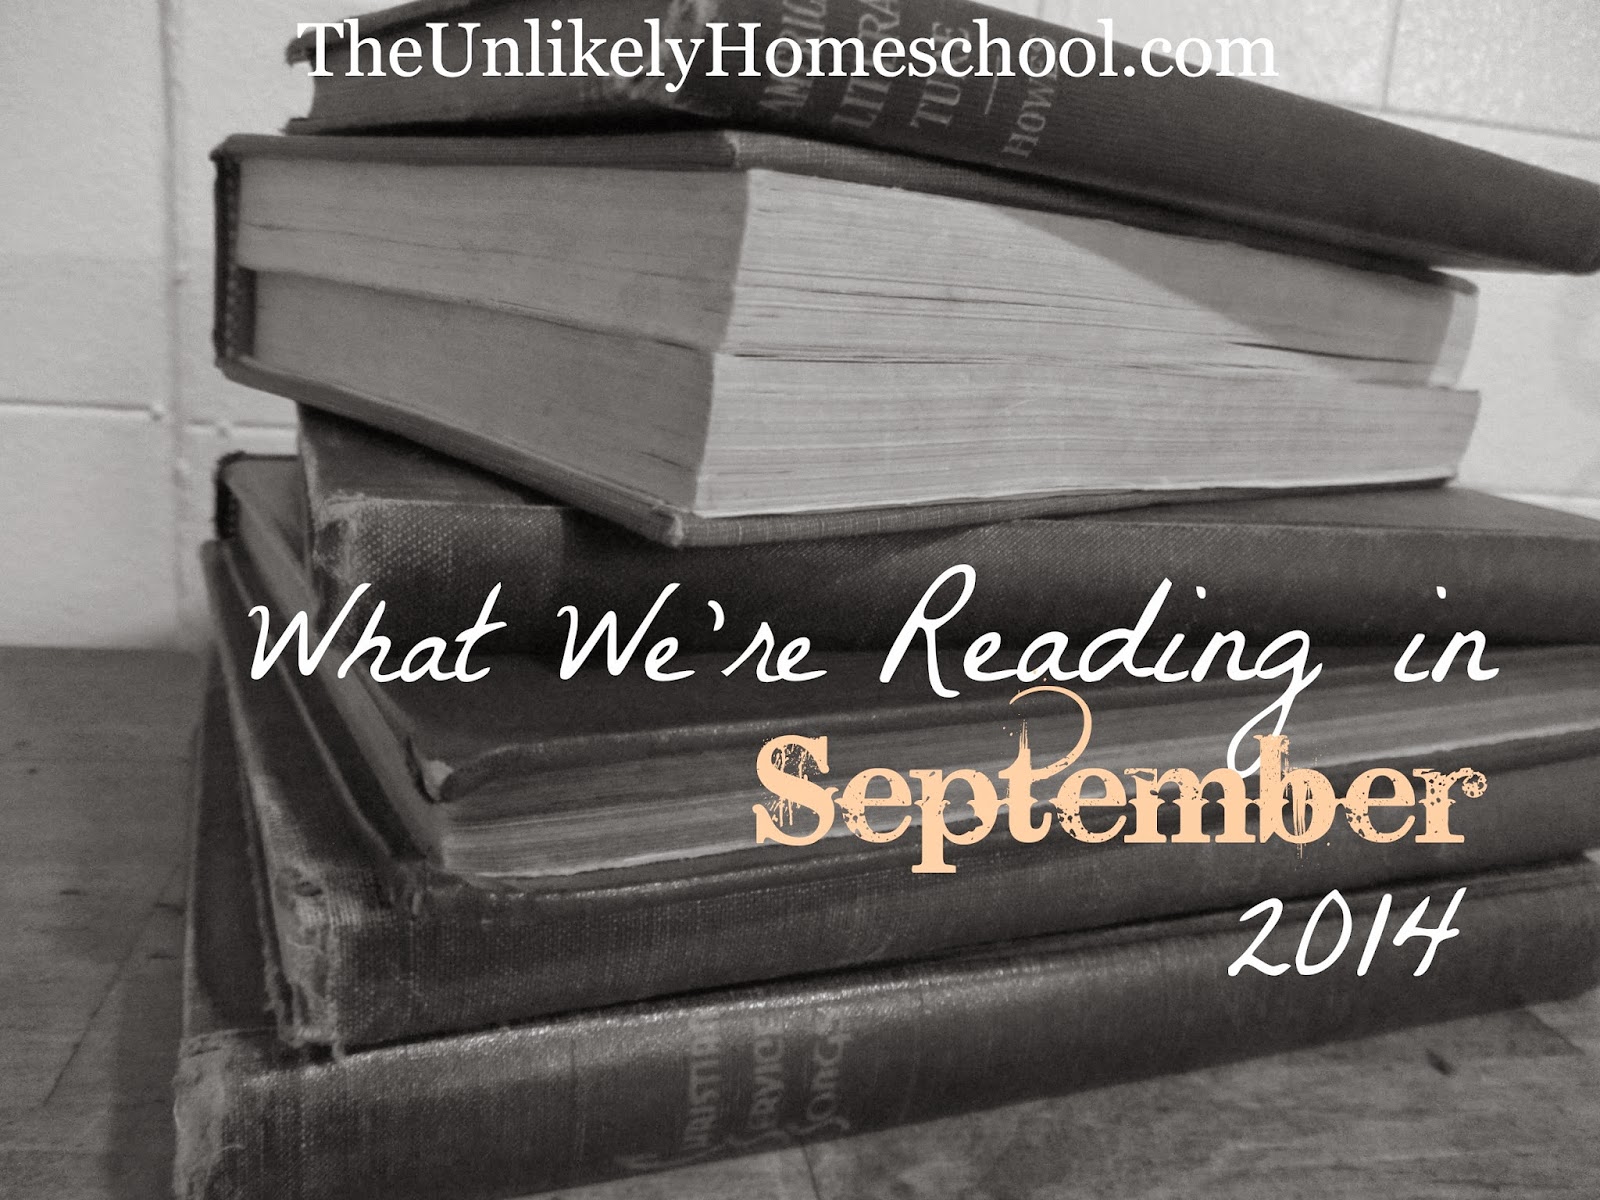 What We're Reading in September 2014 (Homeschool book choices for mom and kids in 6th, 3rd, 2nd, and K) The Unlikely Homeschool